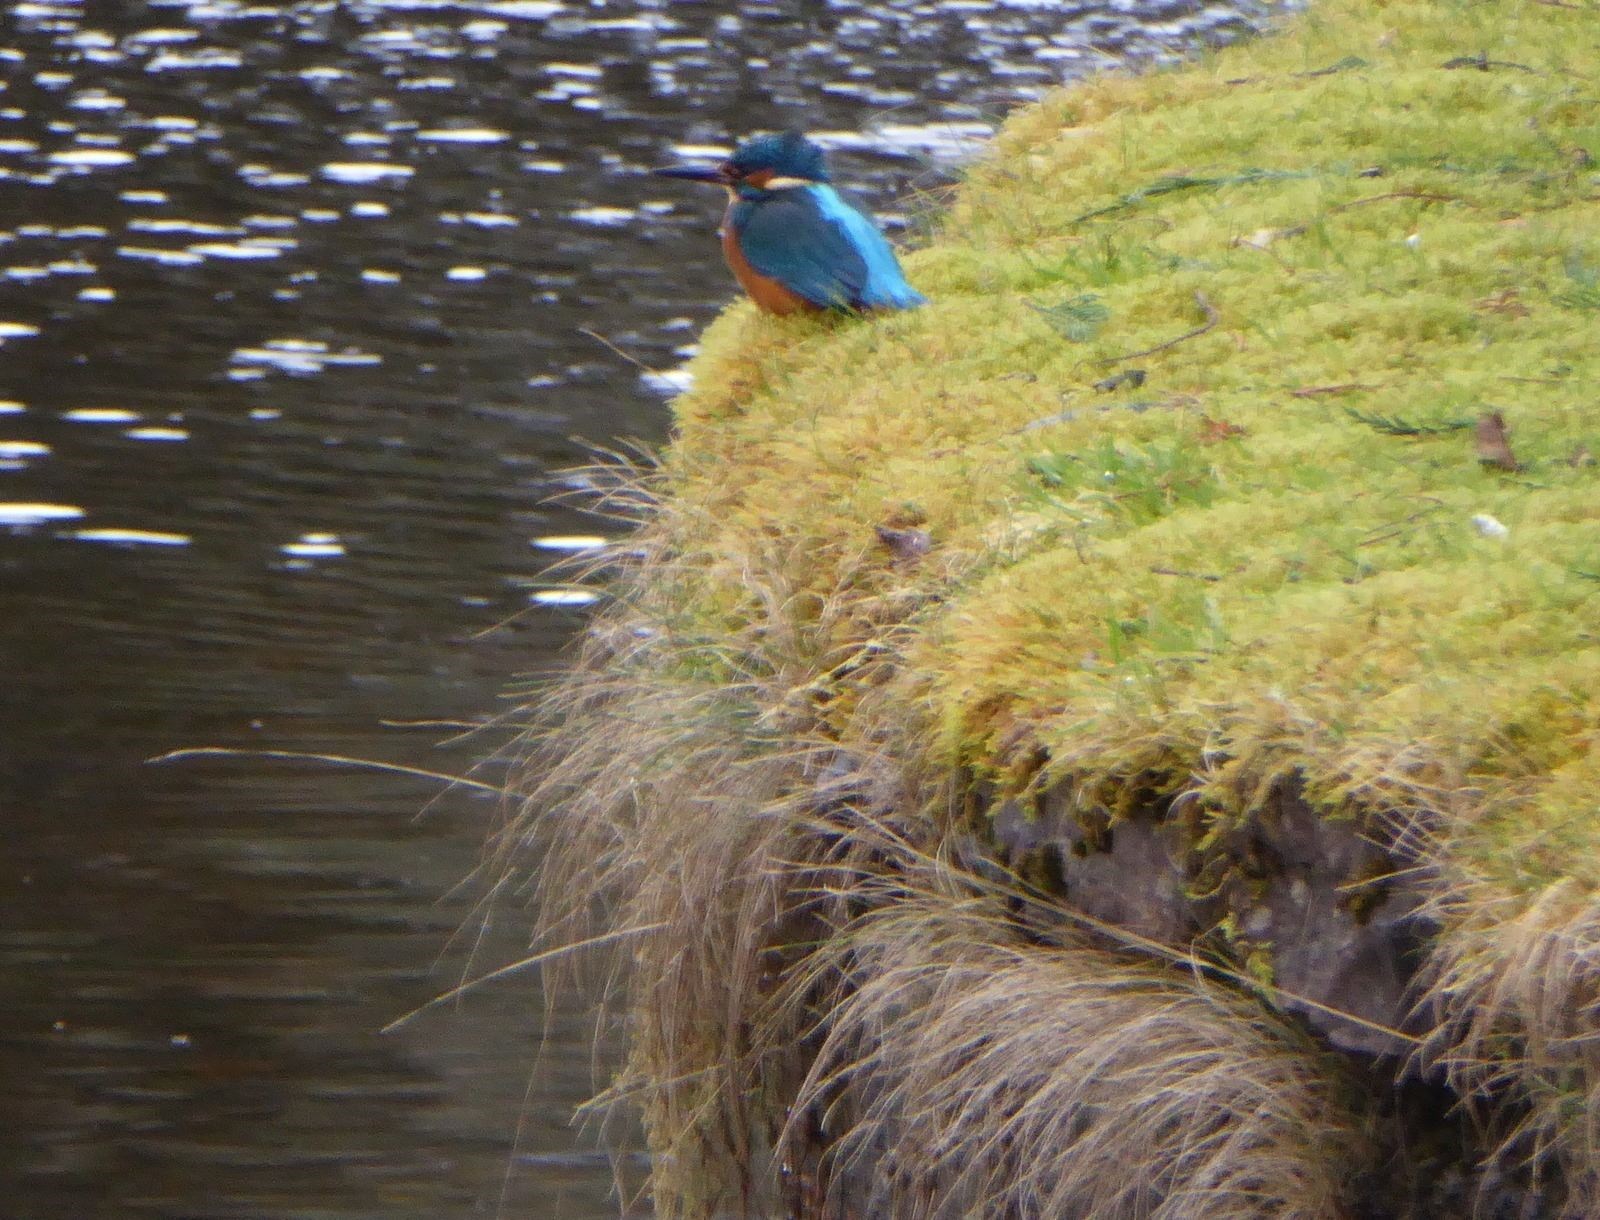 A Kingfisher that can often be seen in the same place in Whin Park